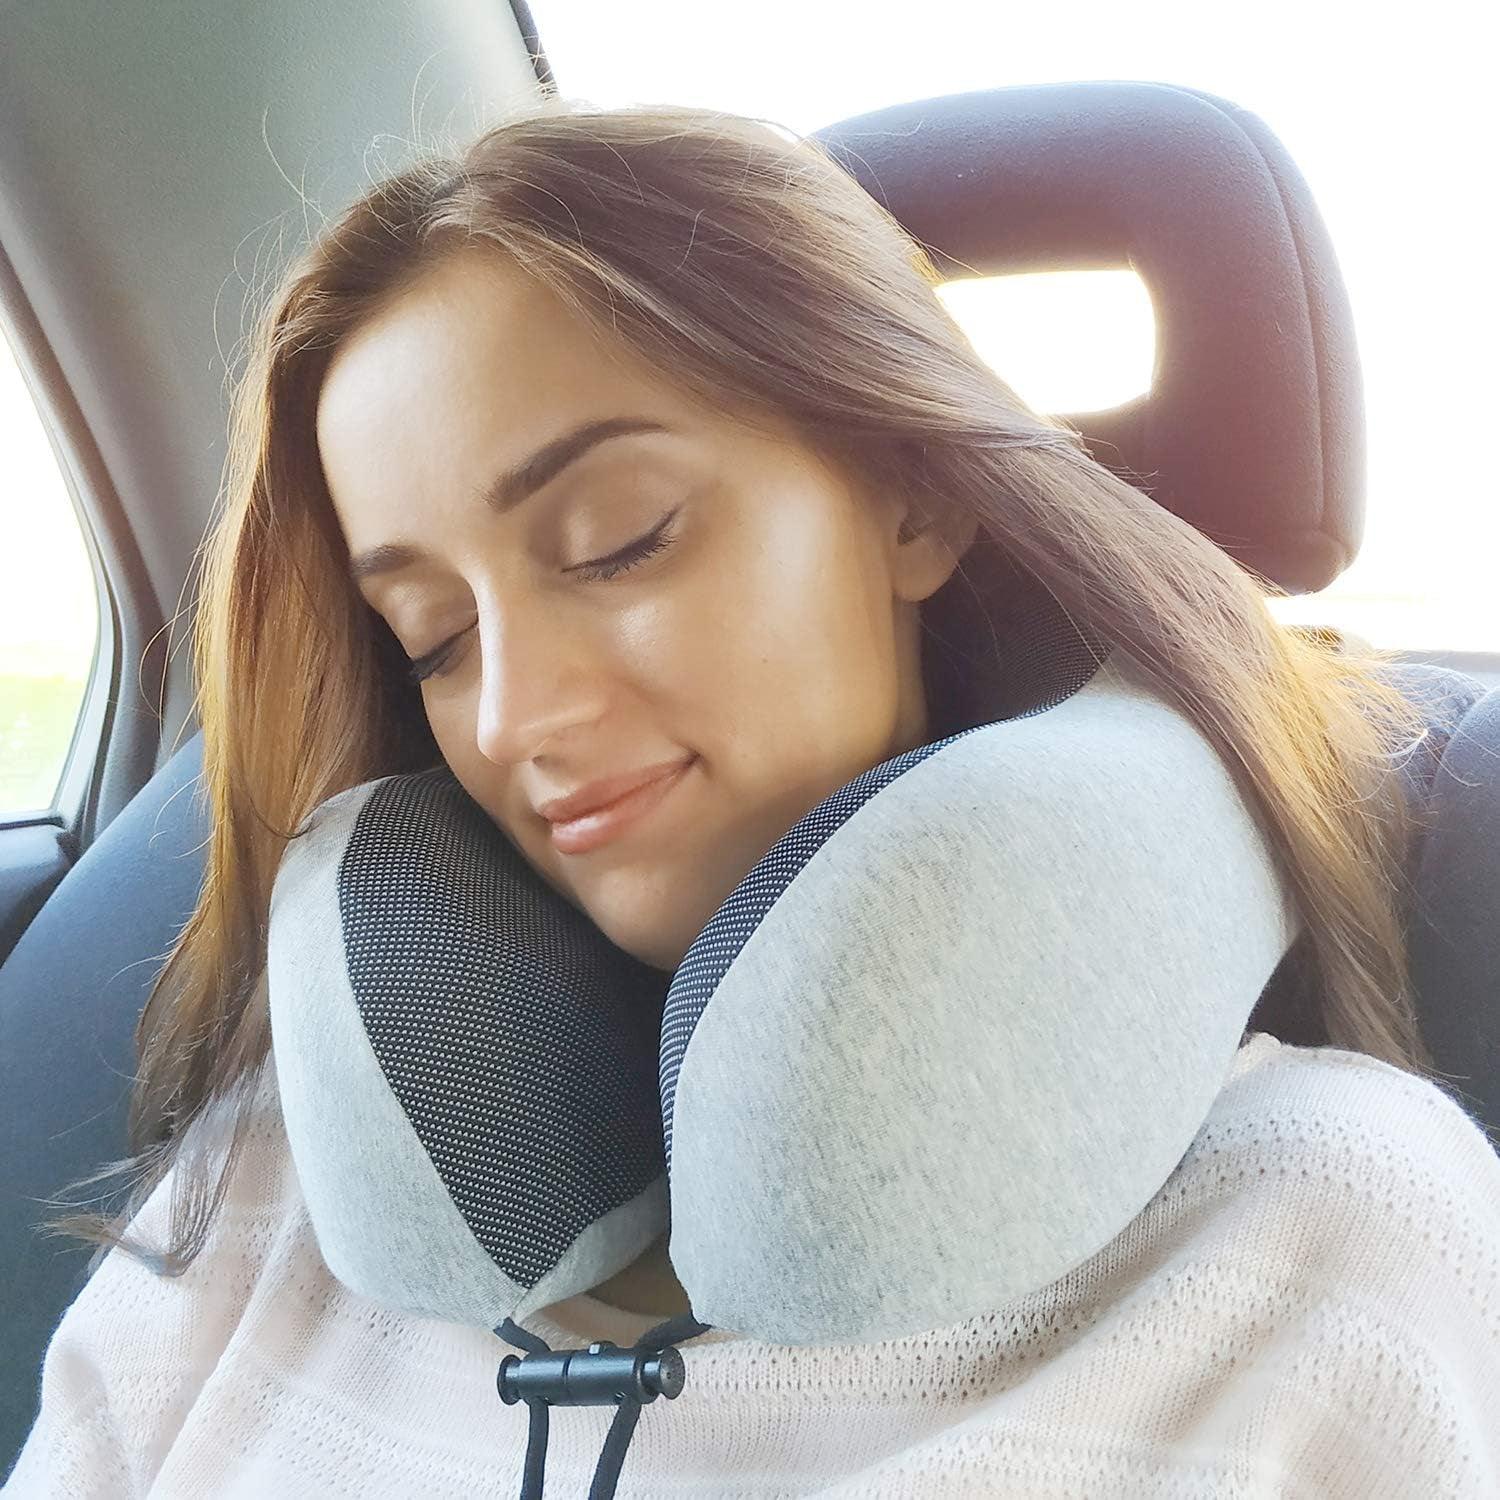 Napfun Neck Pillow for Traveling, Upgraded Travel Neck Pillow for Airplane 100% Pure Memory Foam Travel Pillow for Flight Headrest Sleep, Portable Plane Accessories, Light Grey